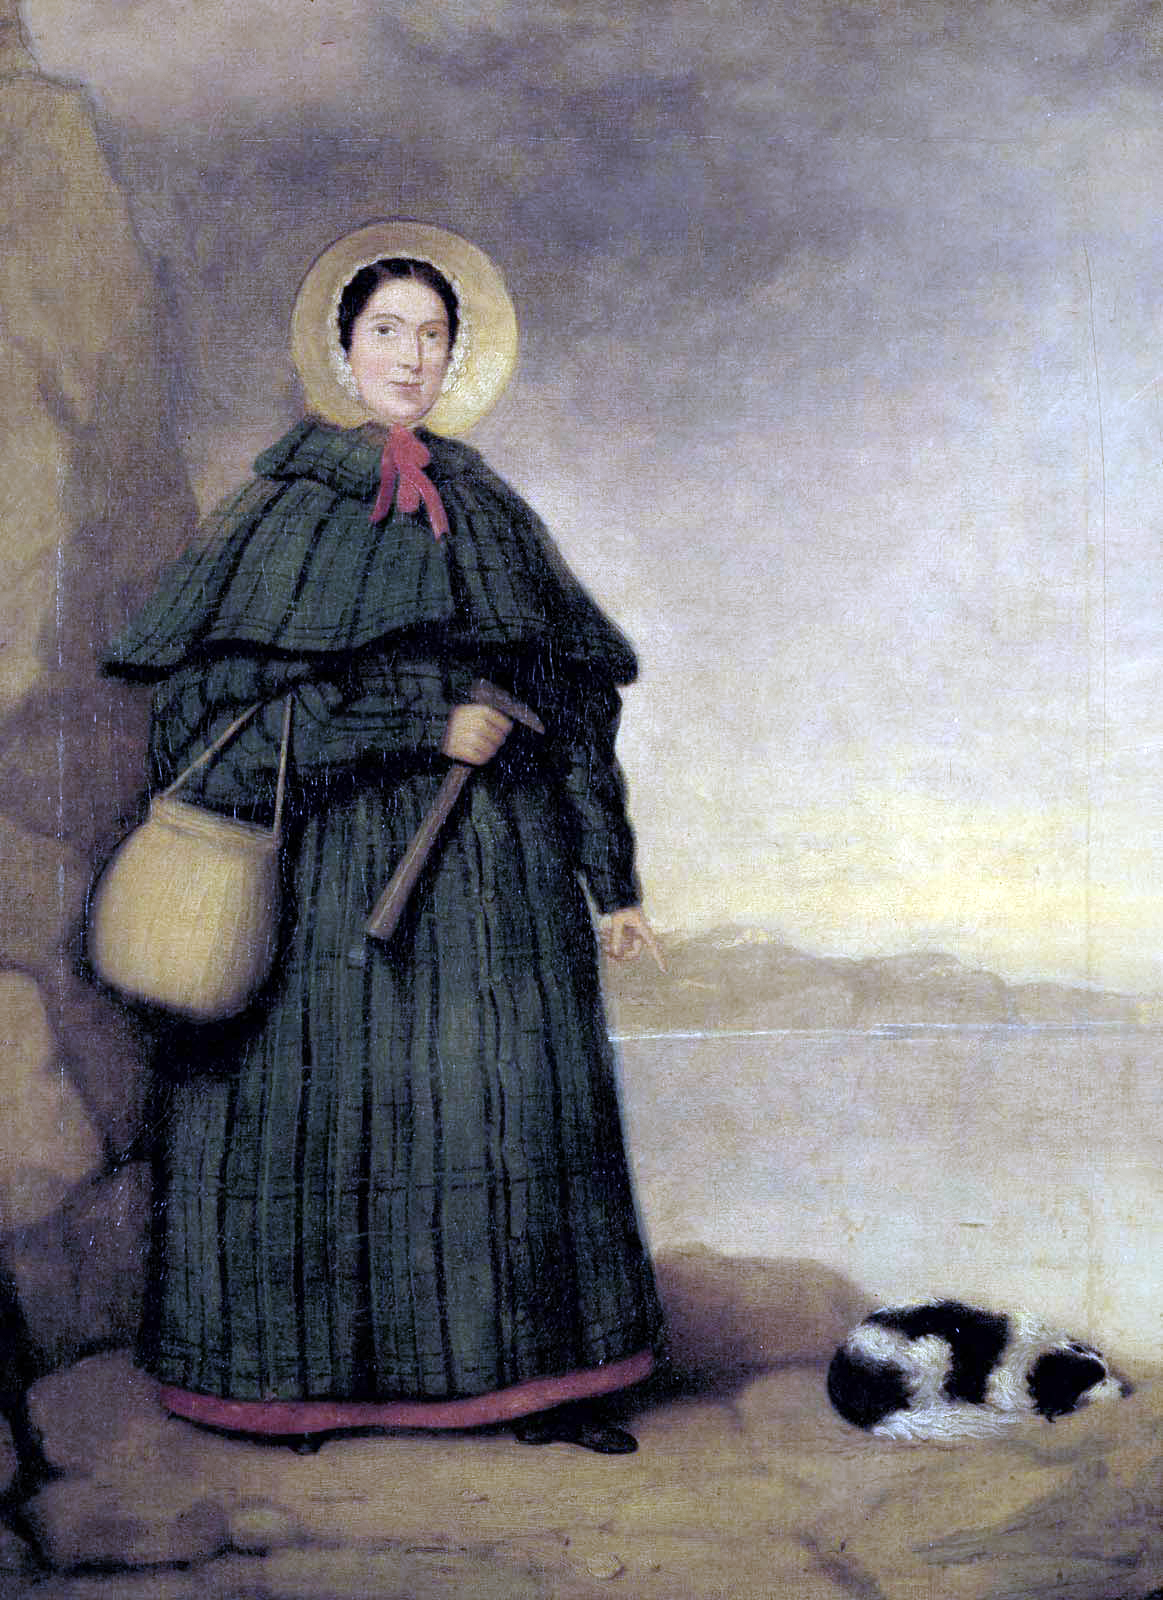 Mary Anning painting wikipedia